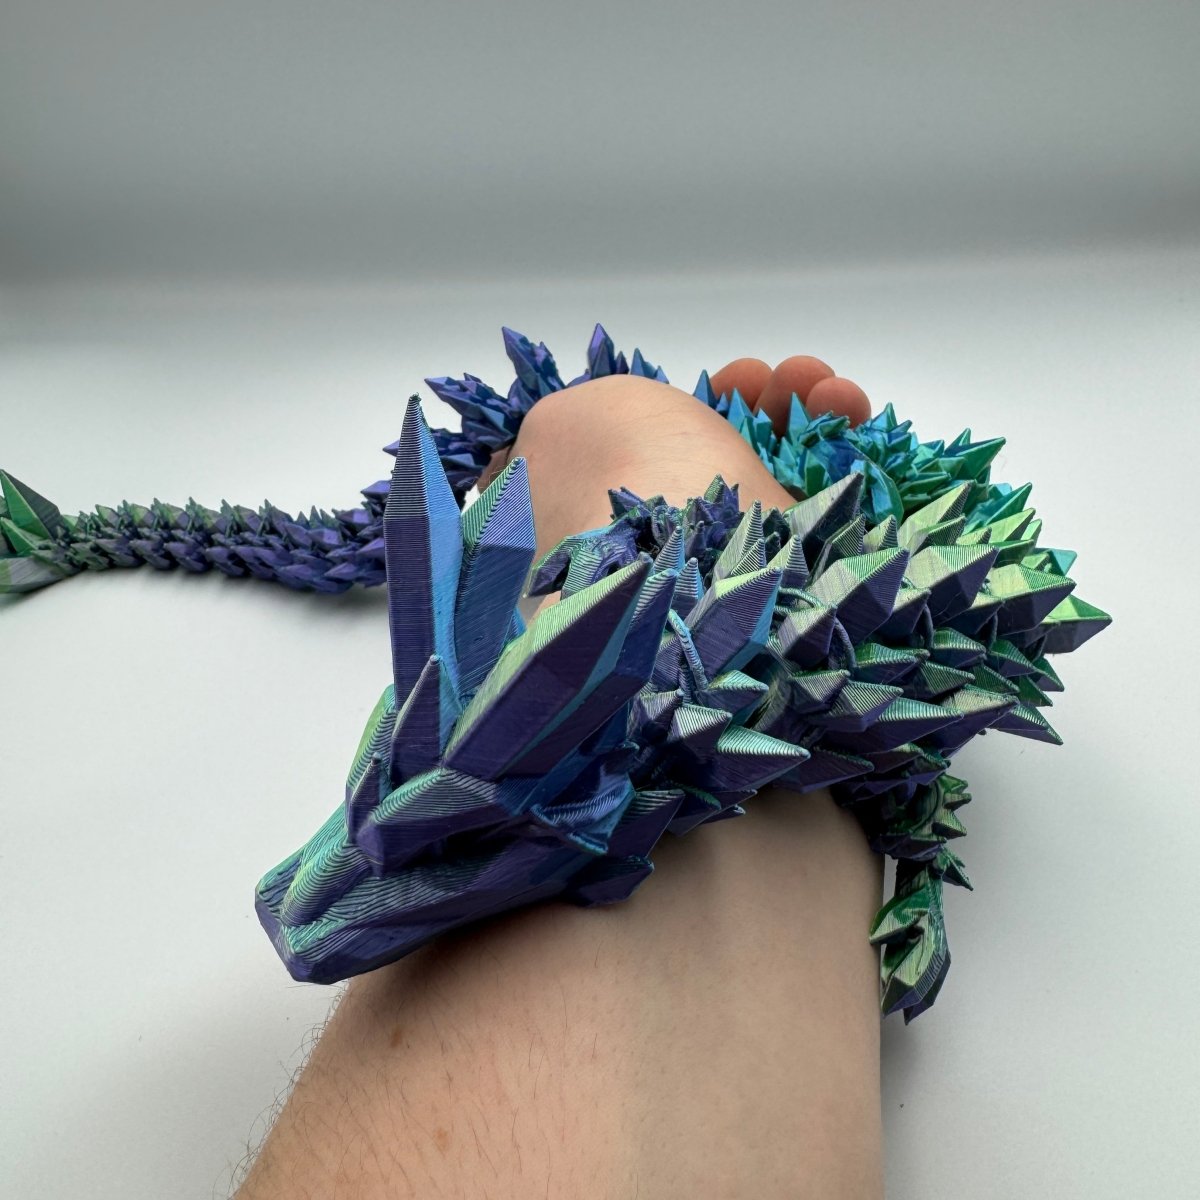 Crystal Dragon: Exquisite 3D Printed Flexible Crystal Dragon Sculpture - Cosmic Chameleon